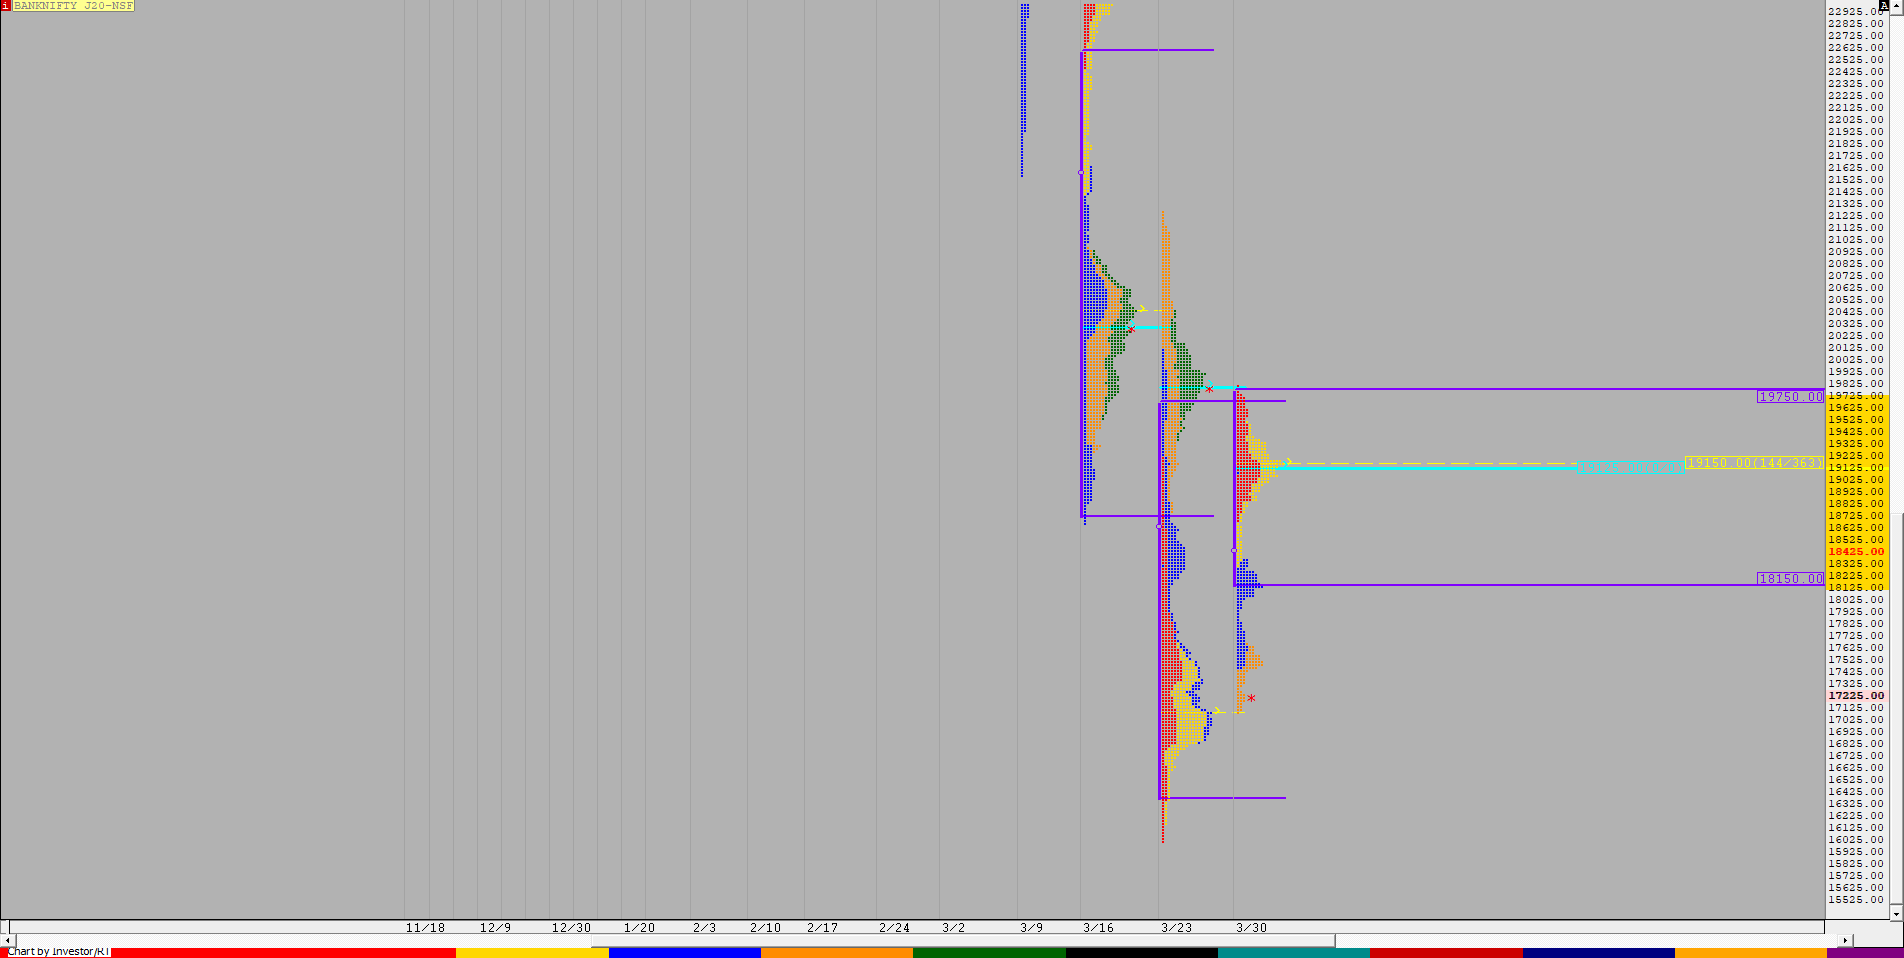 Bnf F 1 Weekly Charts (6Th To 10Th Apr 2020) And Market Profile Analysis Banknifty Futures, Charts, Day Trading, Intraday Trading, Intraday Trading Strategies, Market Profile, Market Profile Trading Strategies, Nifty Futures, Order Flow Analysis, Support And Resistance, Technical Analysis, Trading Strategies, Volume Profile Trading